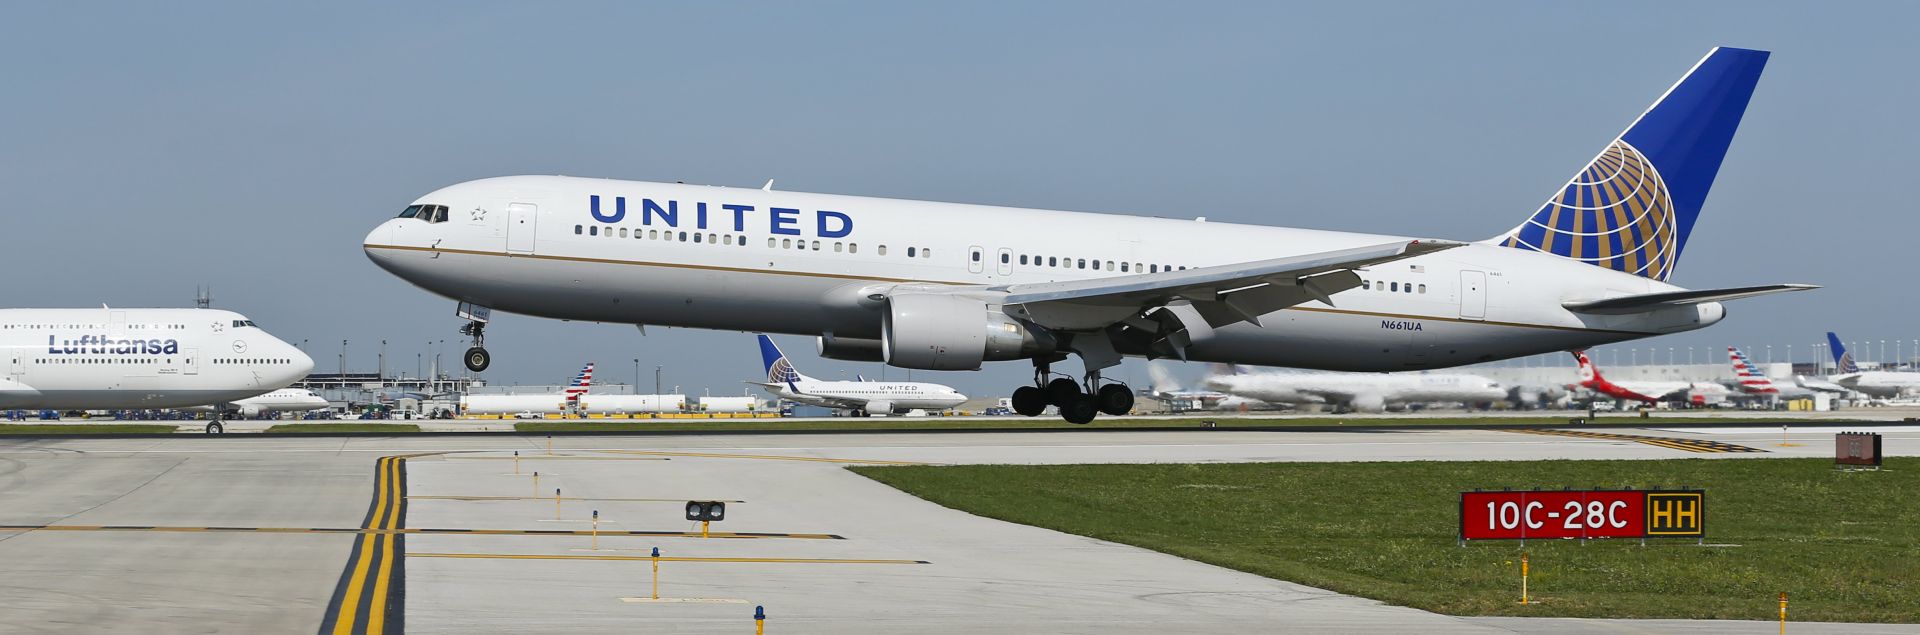 epa05905869 (FILE) - A United Airlines jet arrives at the O'Hare International Airport in Chicago, Illinois, USA, 19 September 2014 (reissued 13 April 2017). A passenger was forcibly removed from an overbooked plane by airport security on 09 April 2017, sparking criticism about the airline's handling of the situation.  EPA/KAMIL KRZACZYNSKI